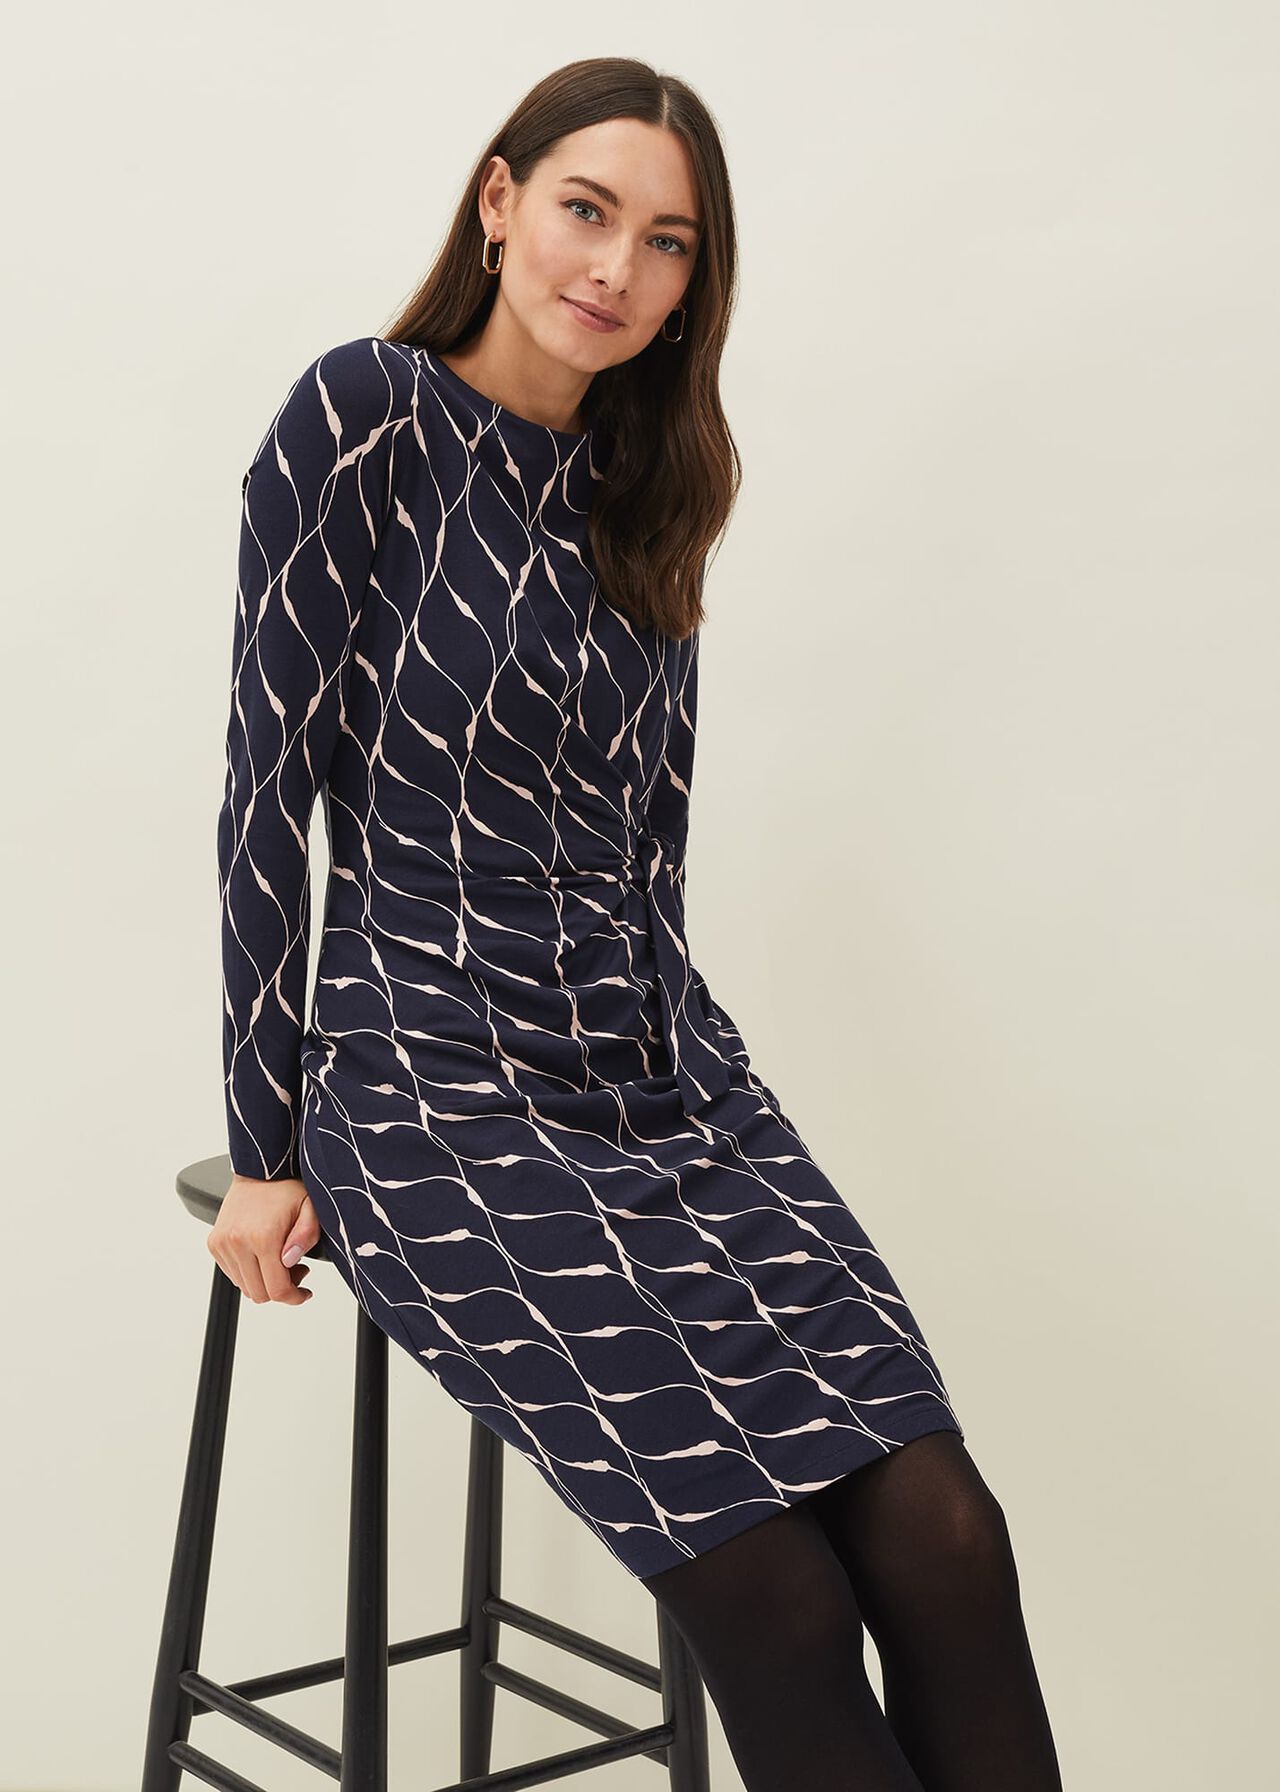 Ally Abstract Print Dress